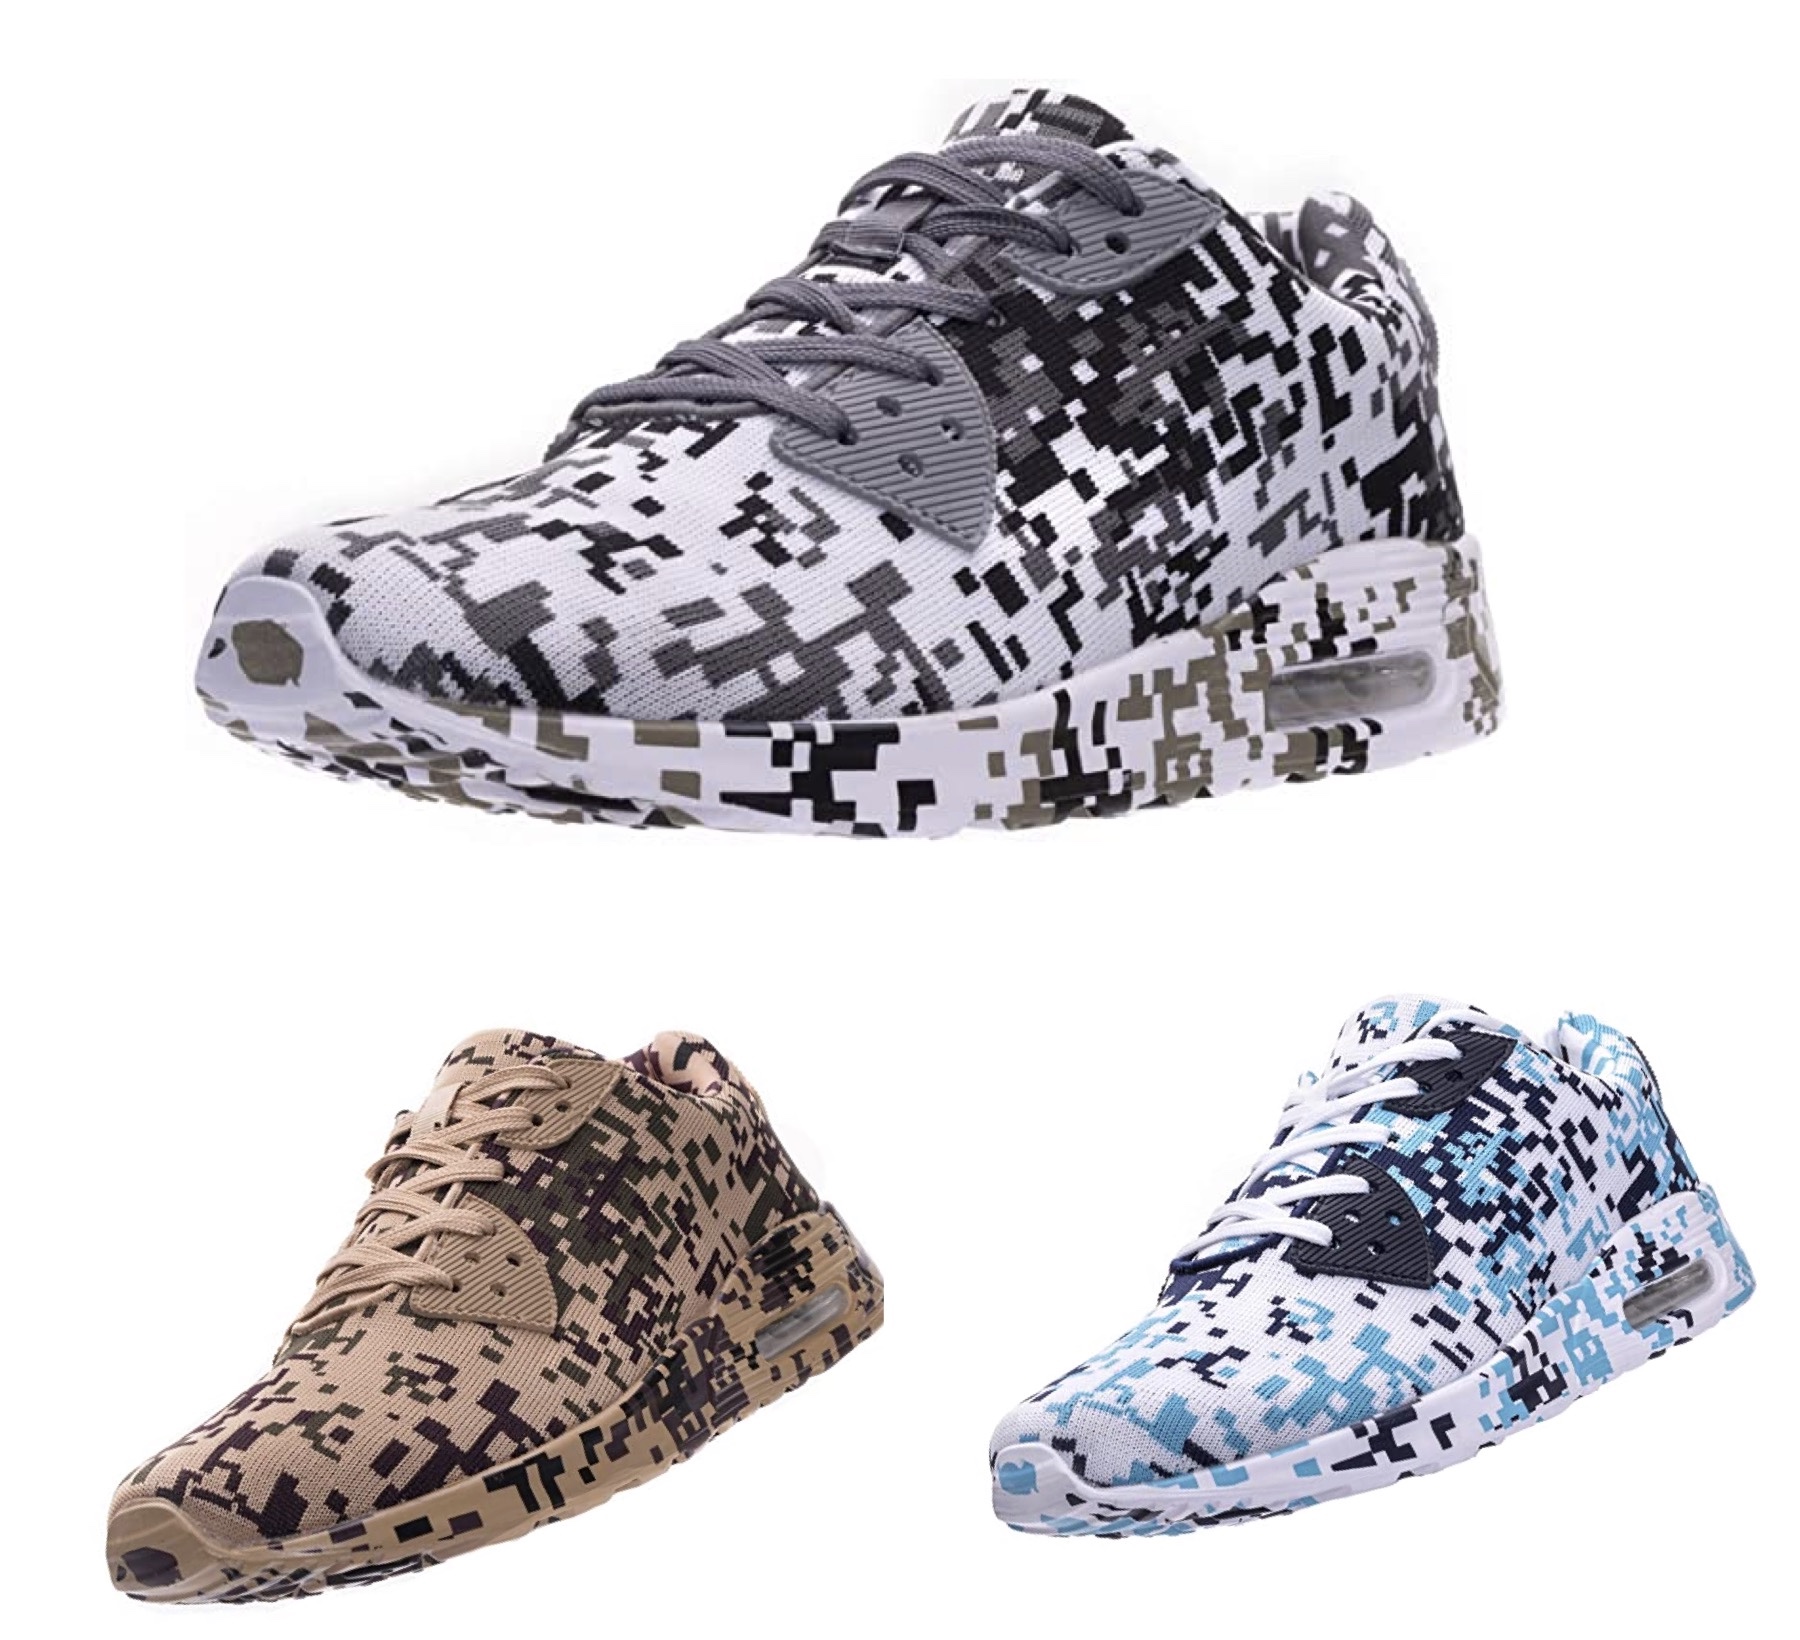 Men's Camo Lifestyle Sneakers Only 14 (Was 33)